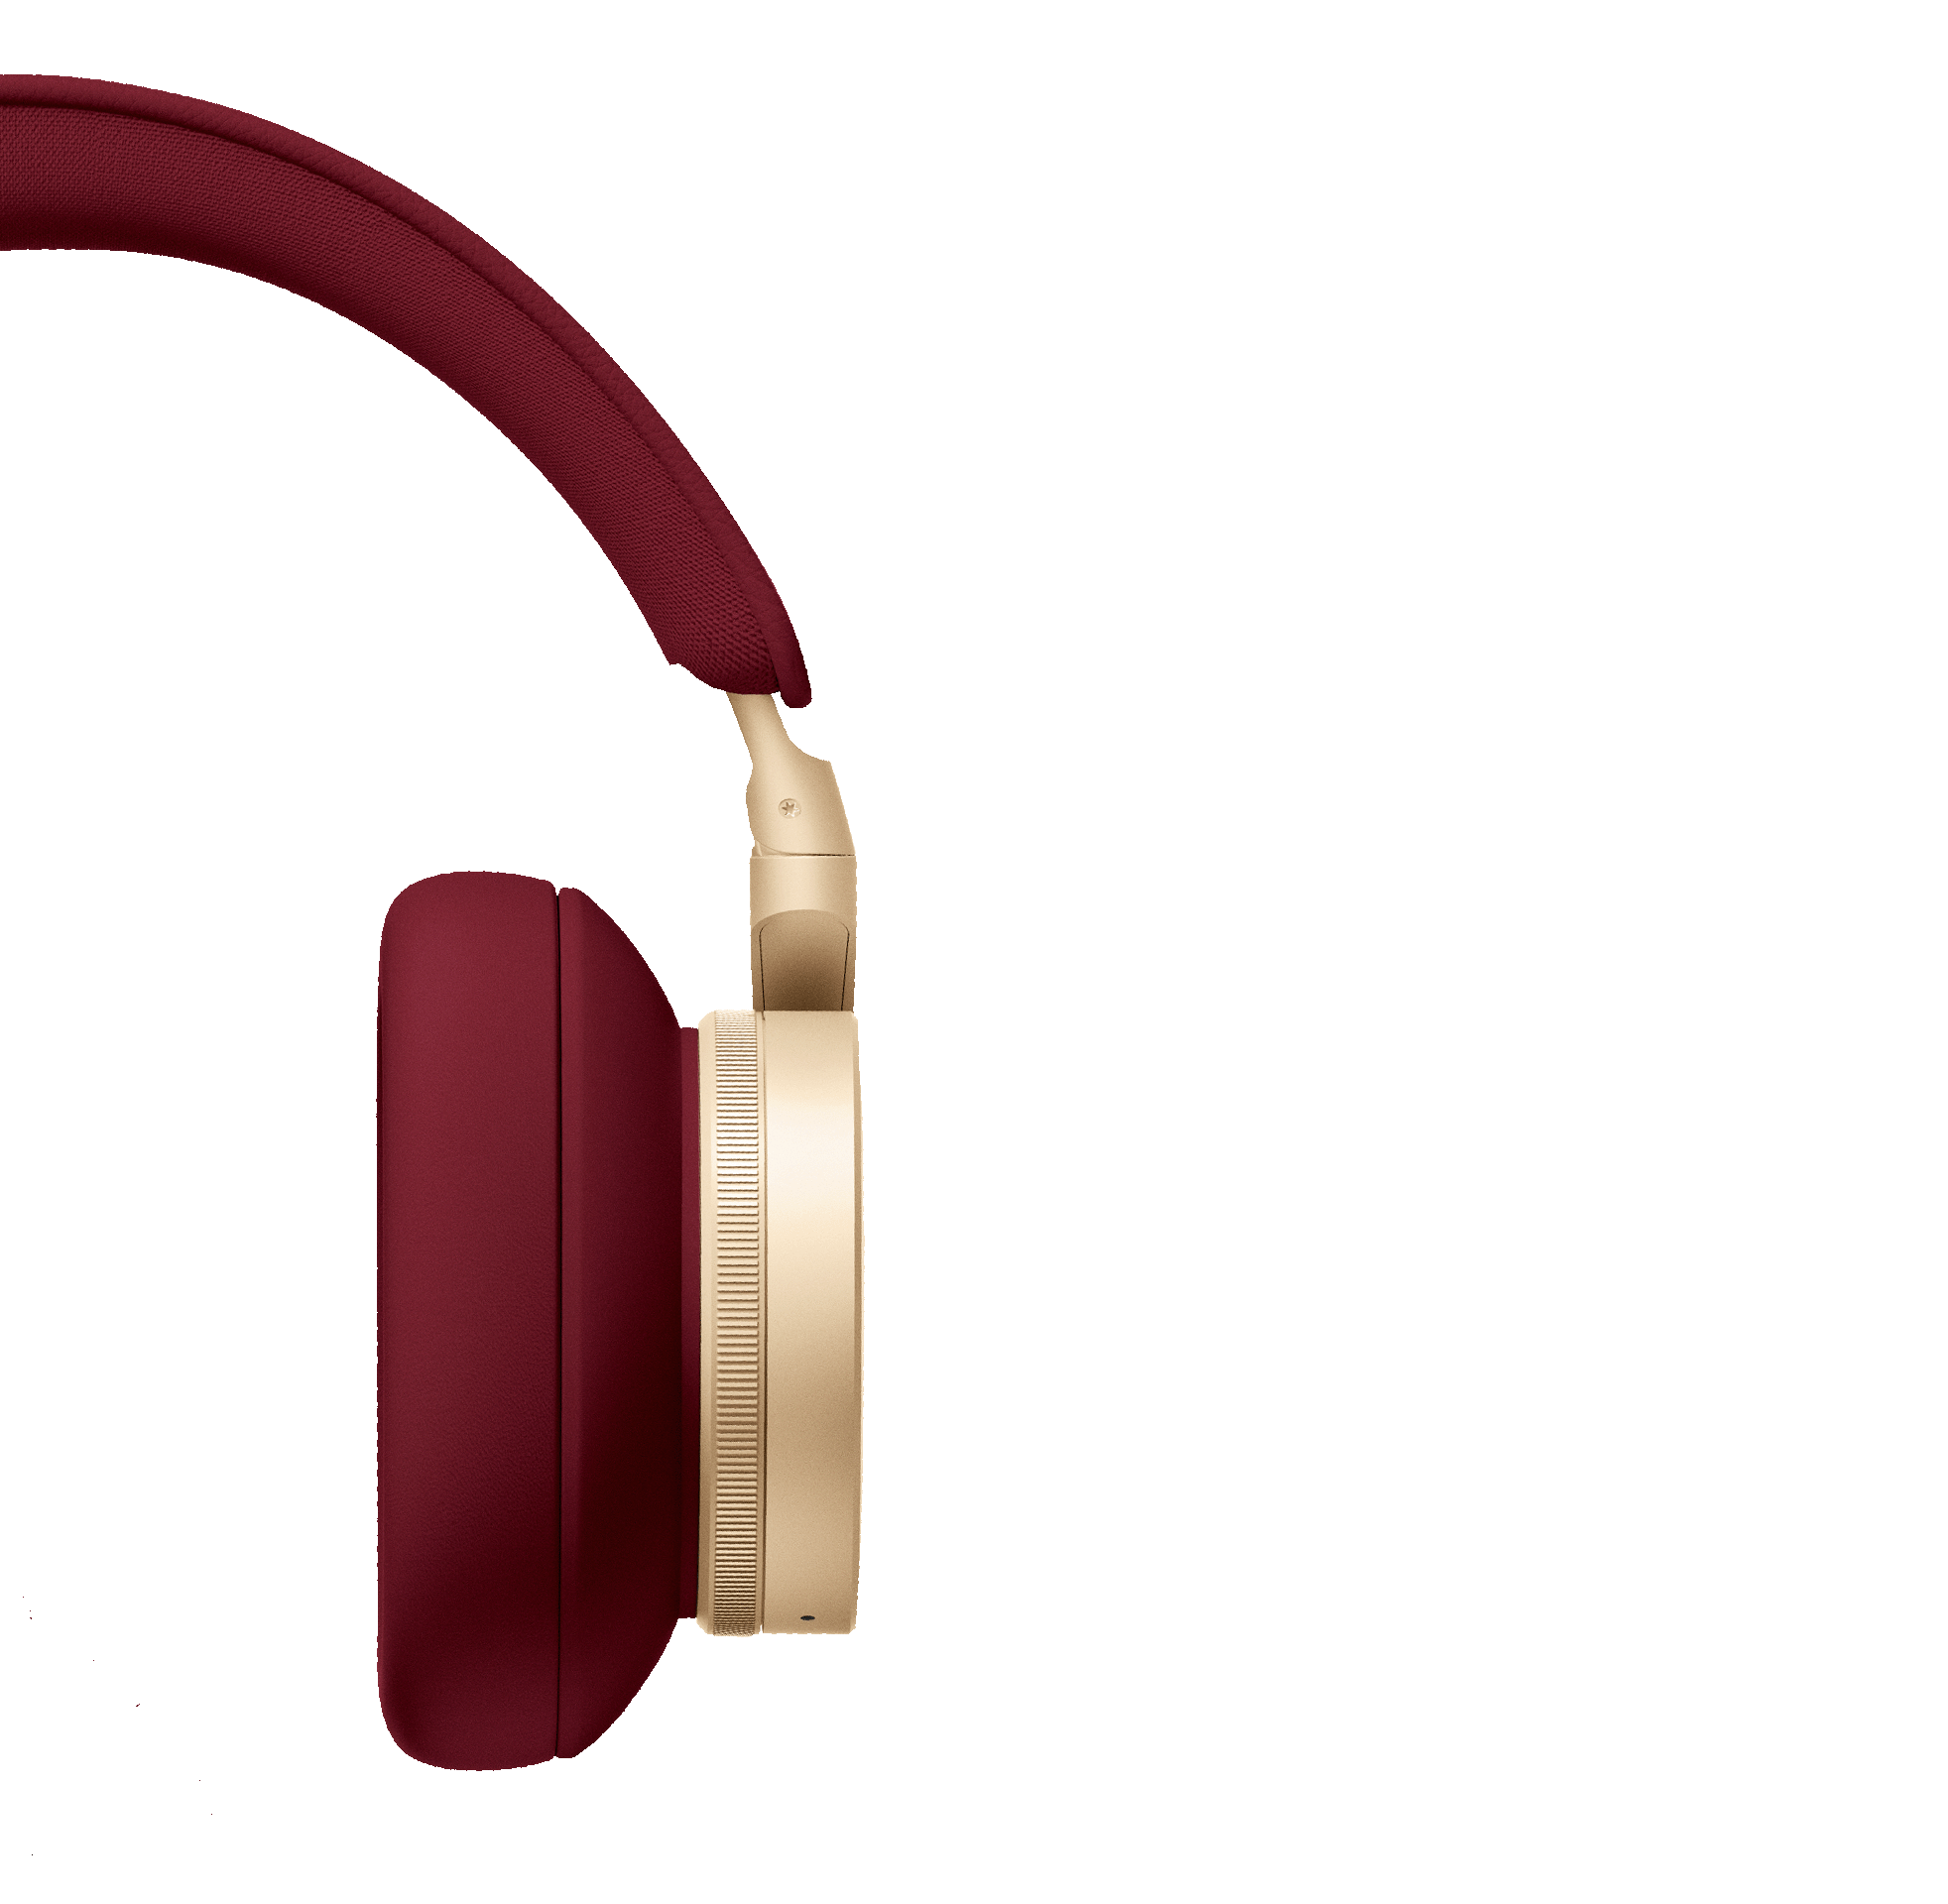 Additional ear cushions for Beoplay H95 | B&O